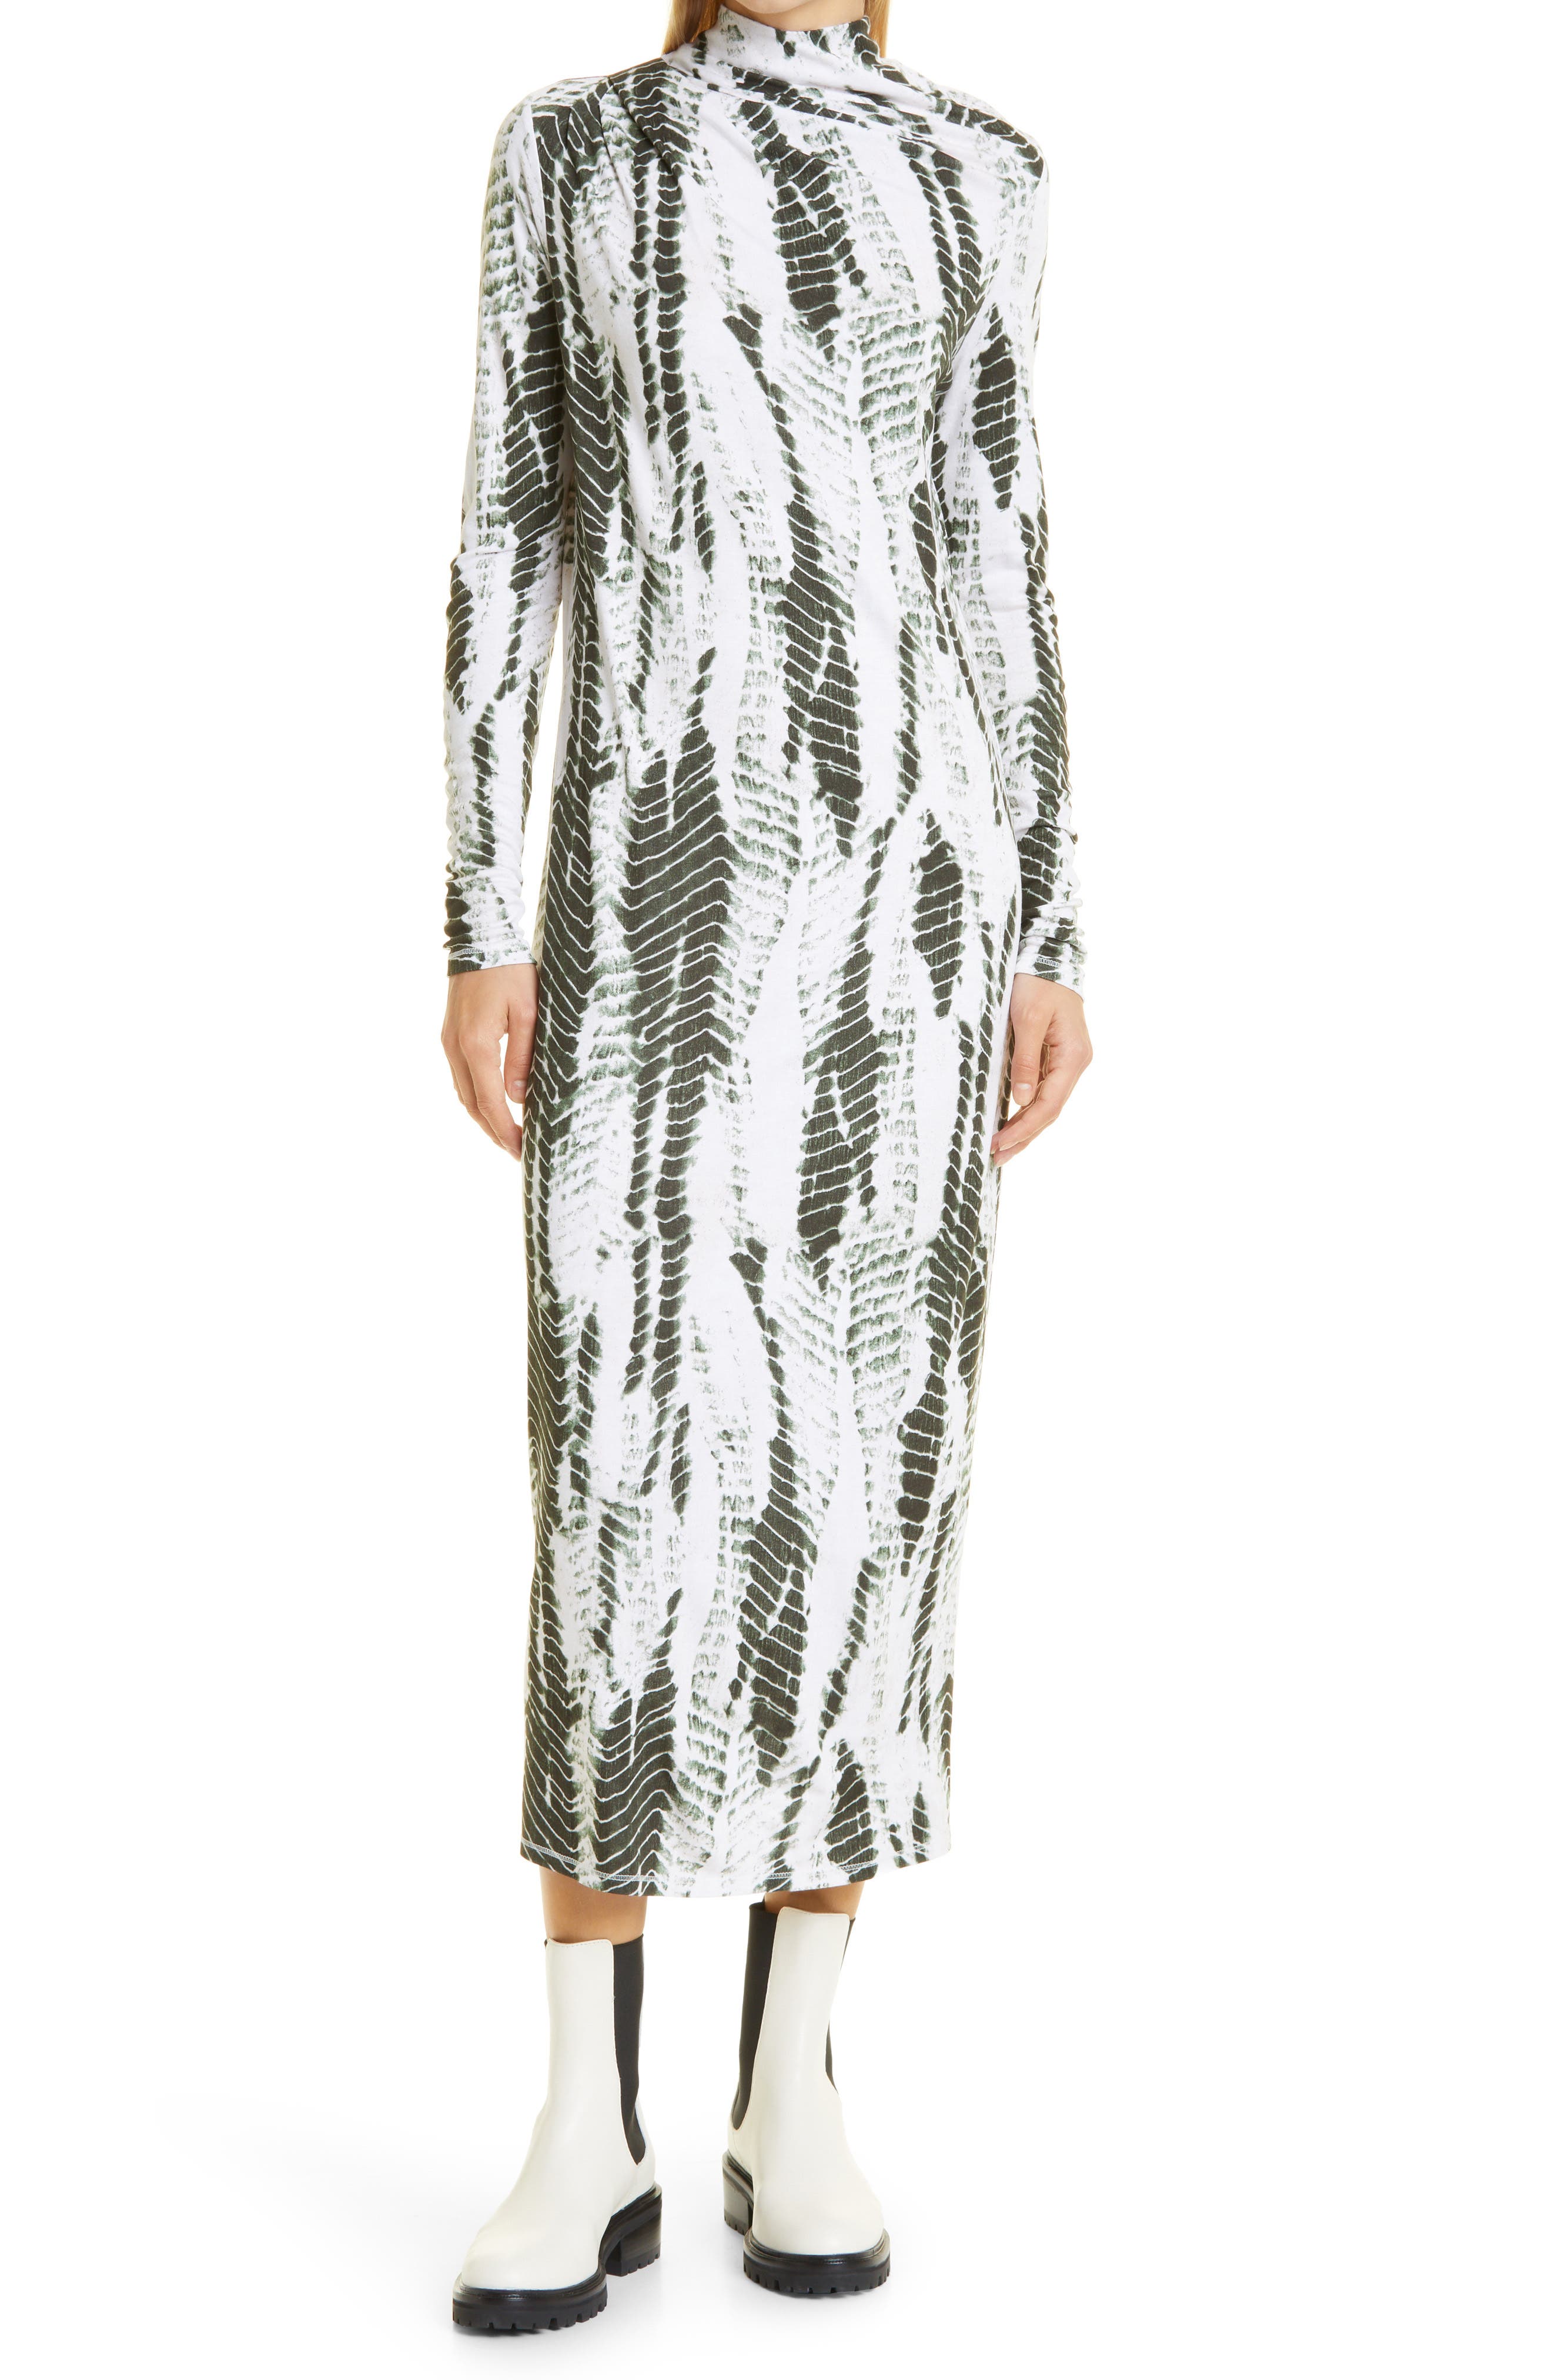 UPC 025500000084 product image for Ted Baker London Kyliea Print Long Sleeve Jersey Dress in Dark Green at Nordstro | upcitemdb.com